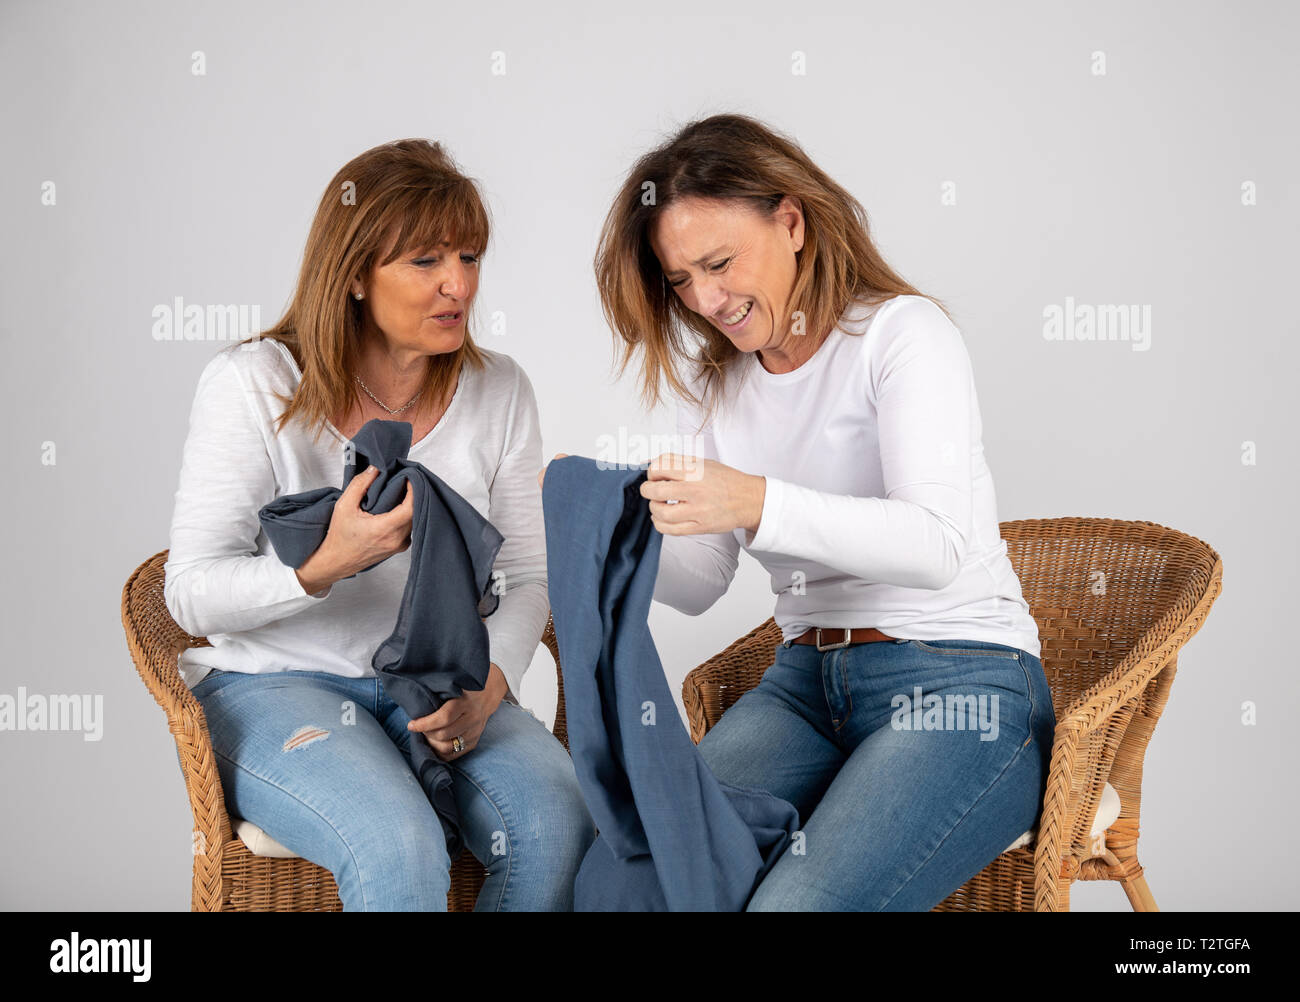 50 year old friends dressed in blue jeans and a white t-shirt laugh together playing with a blue scarf. Stock Photo